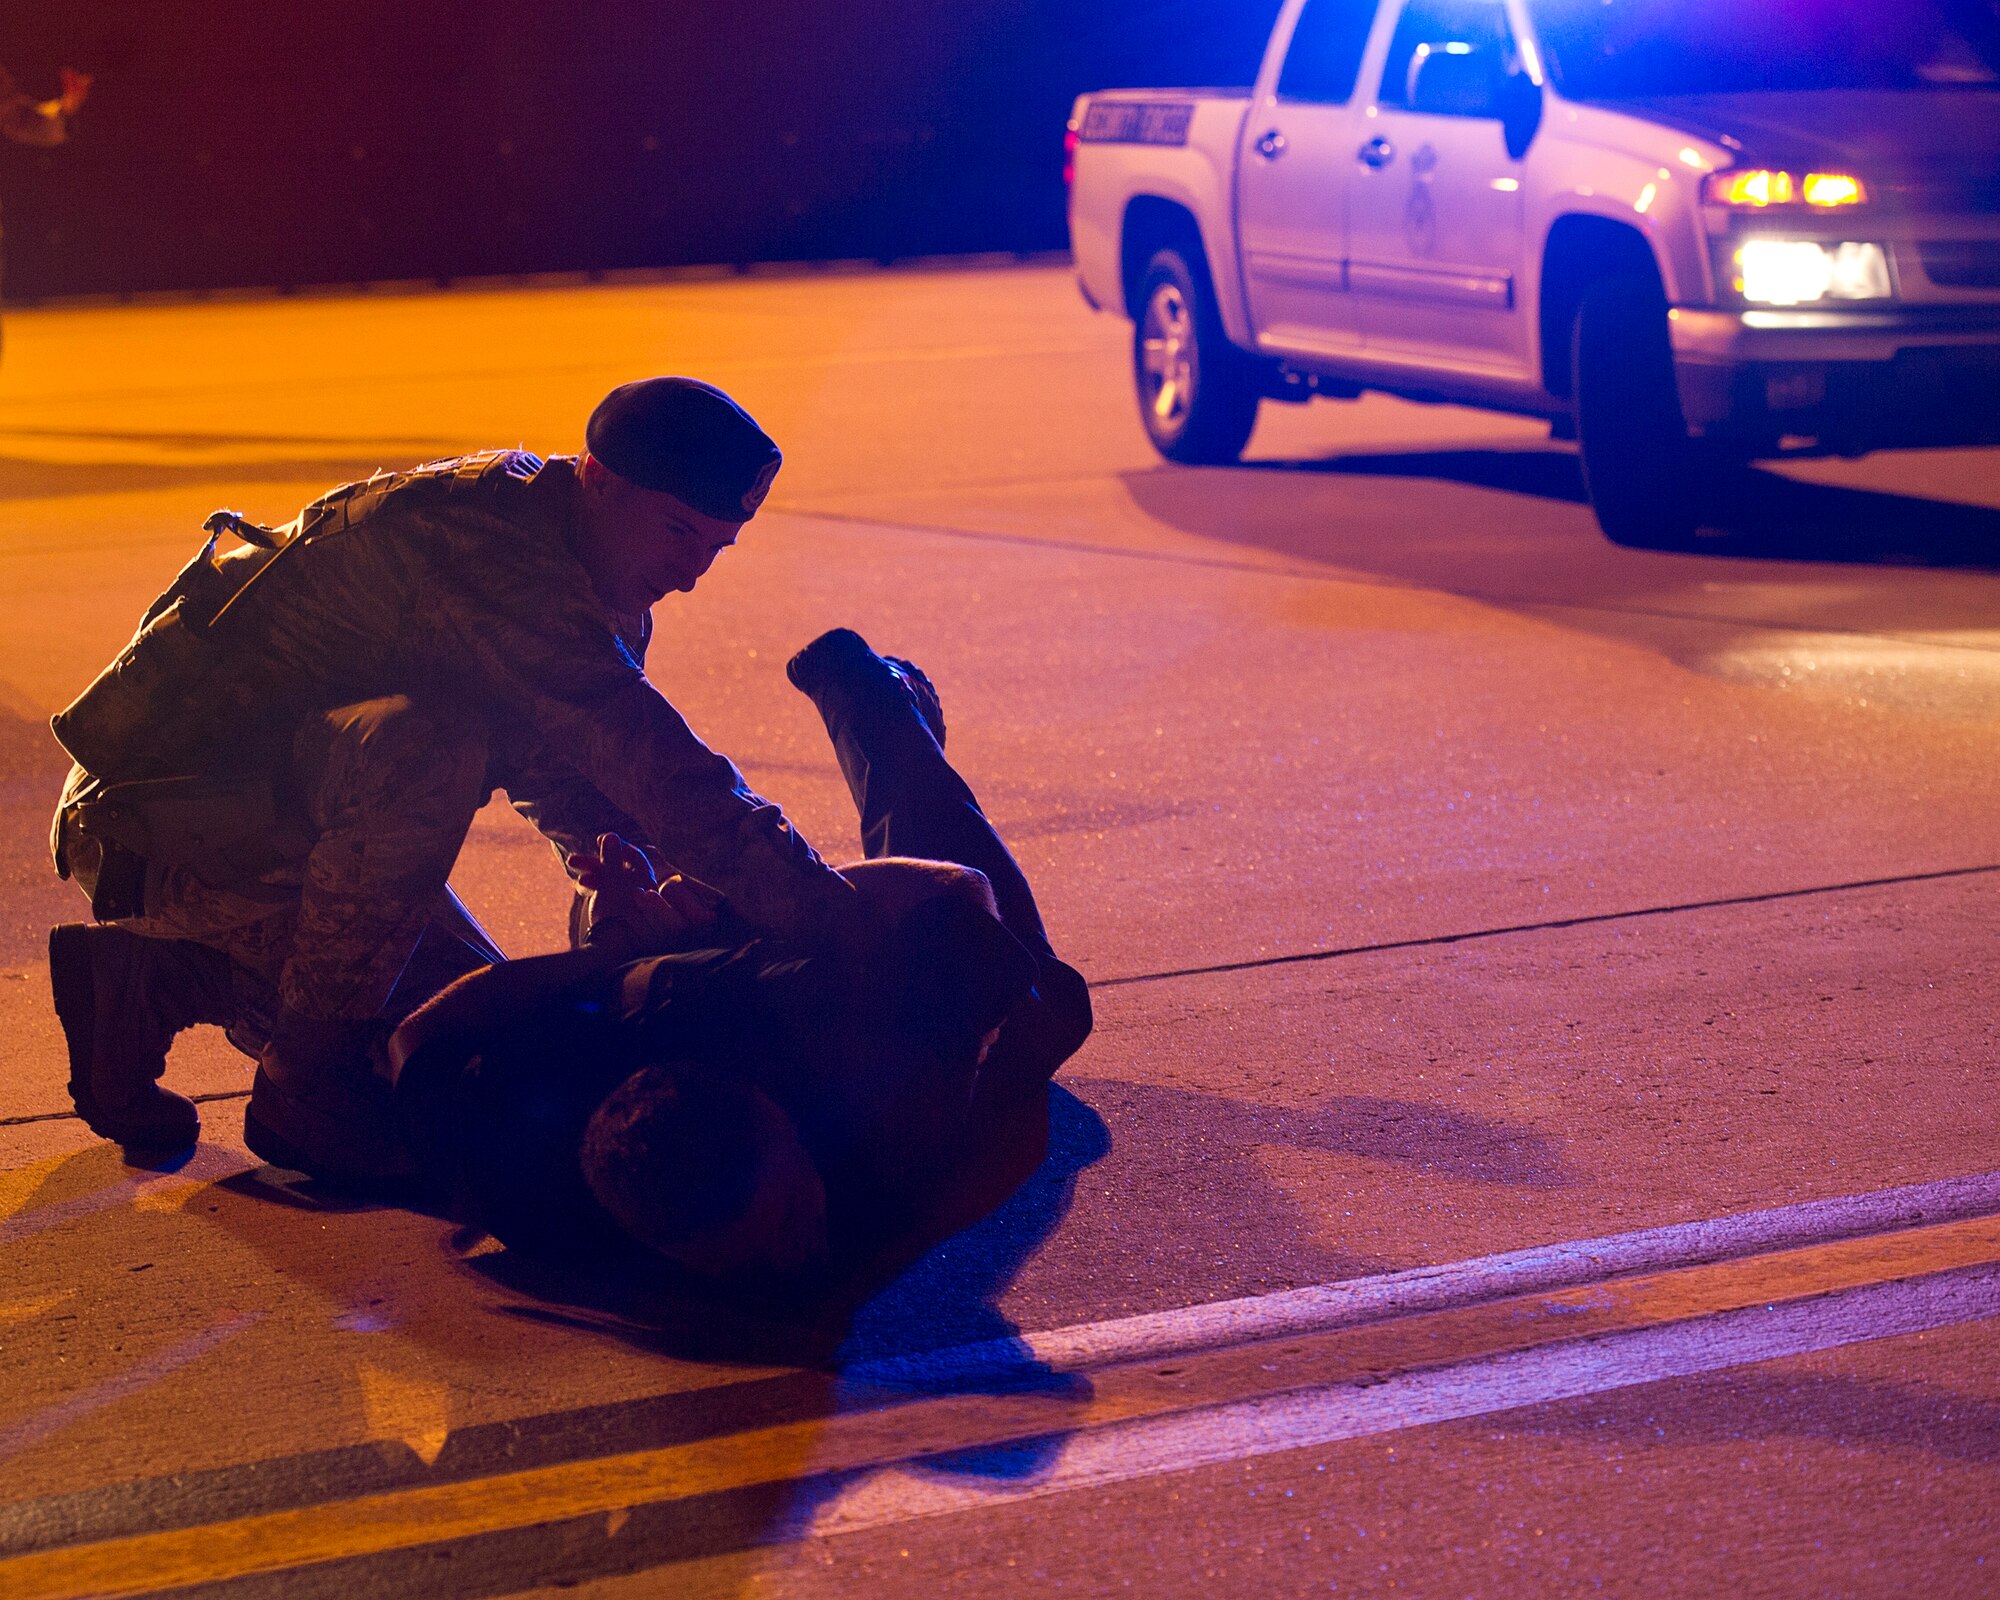 ALTUS AIR FORCE BASE, Okla. -- U.S. Air Force Senior Airman Brenden Marlin, 97th Security Forces Squadron response force patrolman, rolls Nickey Jones, 97th SFS response force patrolman, after restraining his hands, during a simulated security incident on the flightline Aug. 27. The 97th SFS is responsible for guarding the base 24 hours a day. They are one of the various squadrons that work around the clock to ensure mission success at Altus AFB. (U.S. Air Force photo by Senior Airman Kenneth W. Norman / Released)